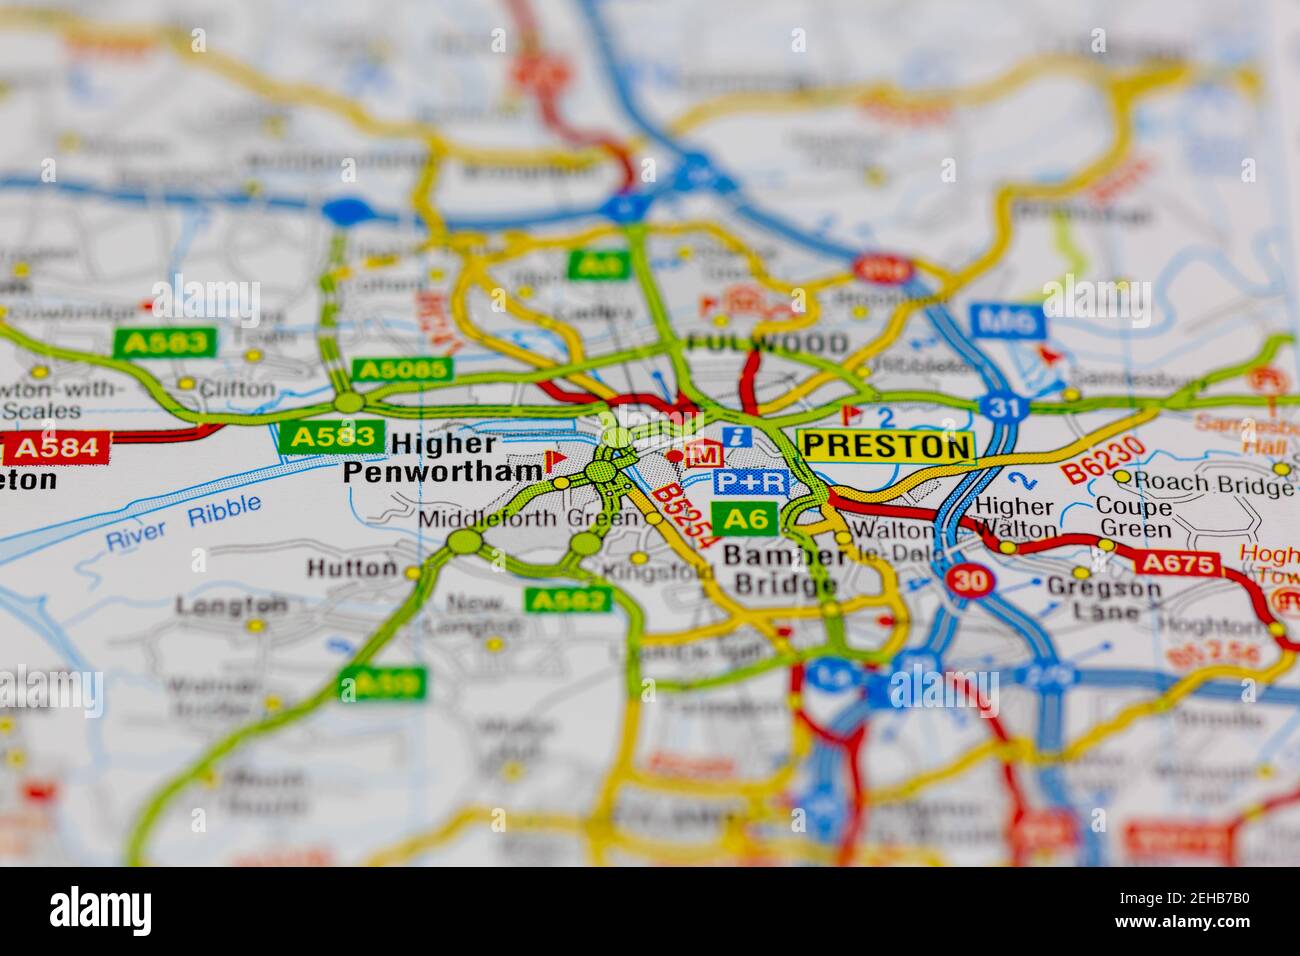 Preston and surrounding areas shown on a road map or Geography map Stock Photo